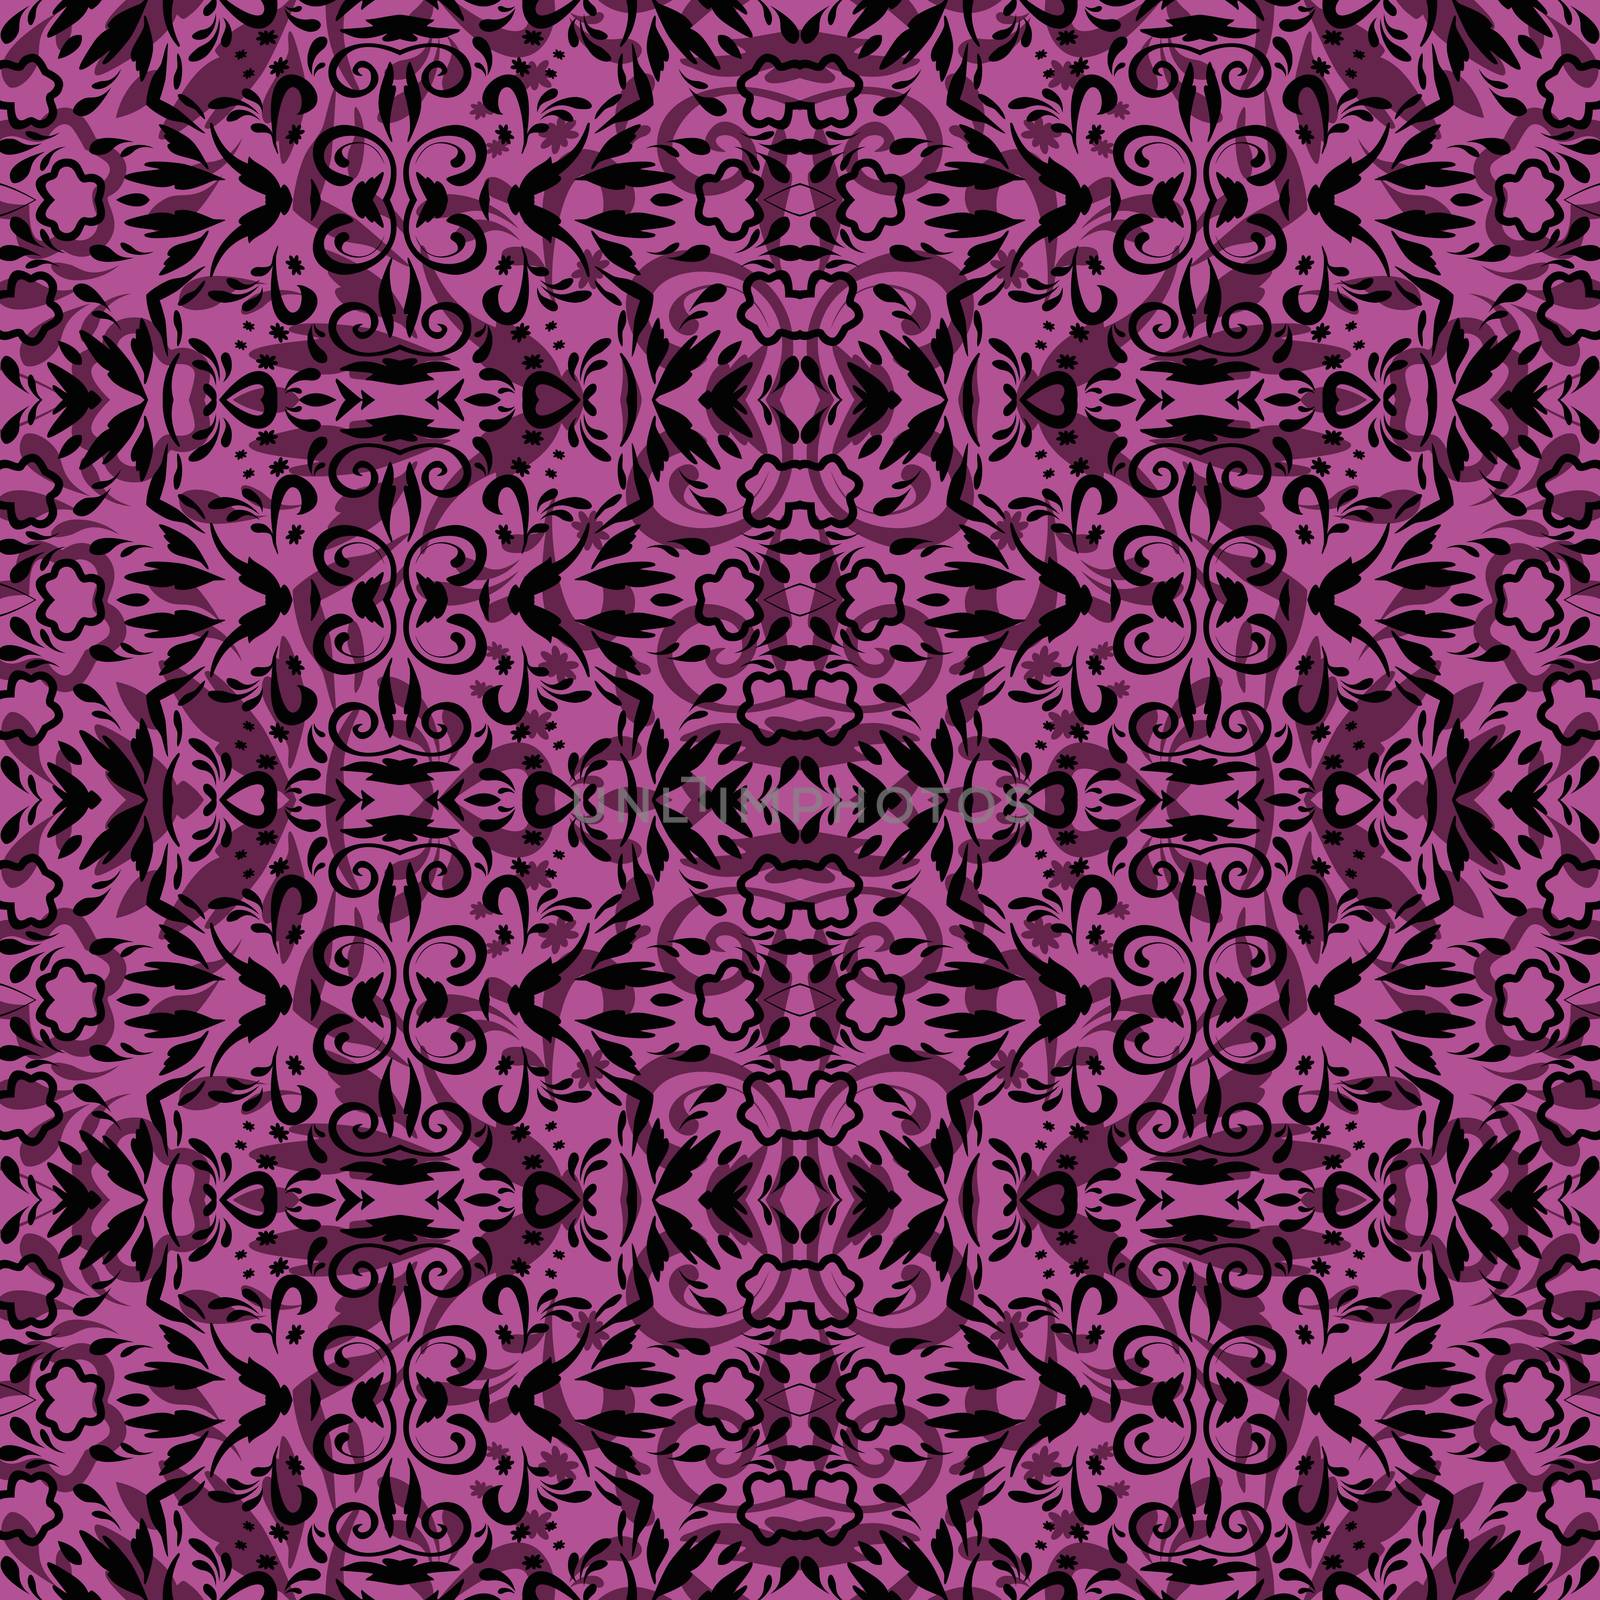 Seamless abstract pattern, black contours on lilac background.